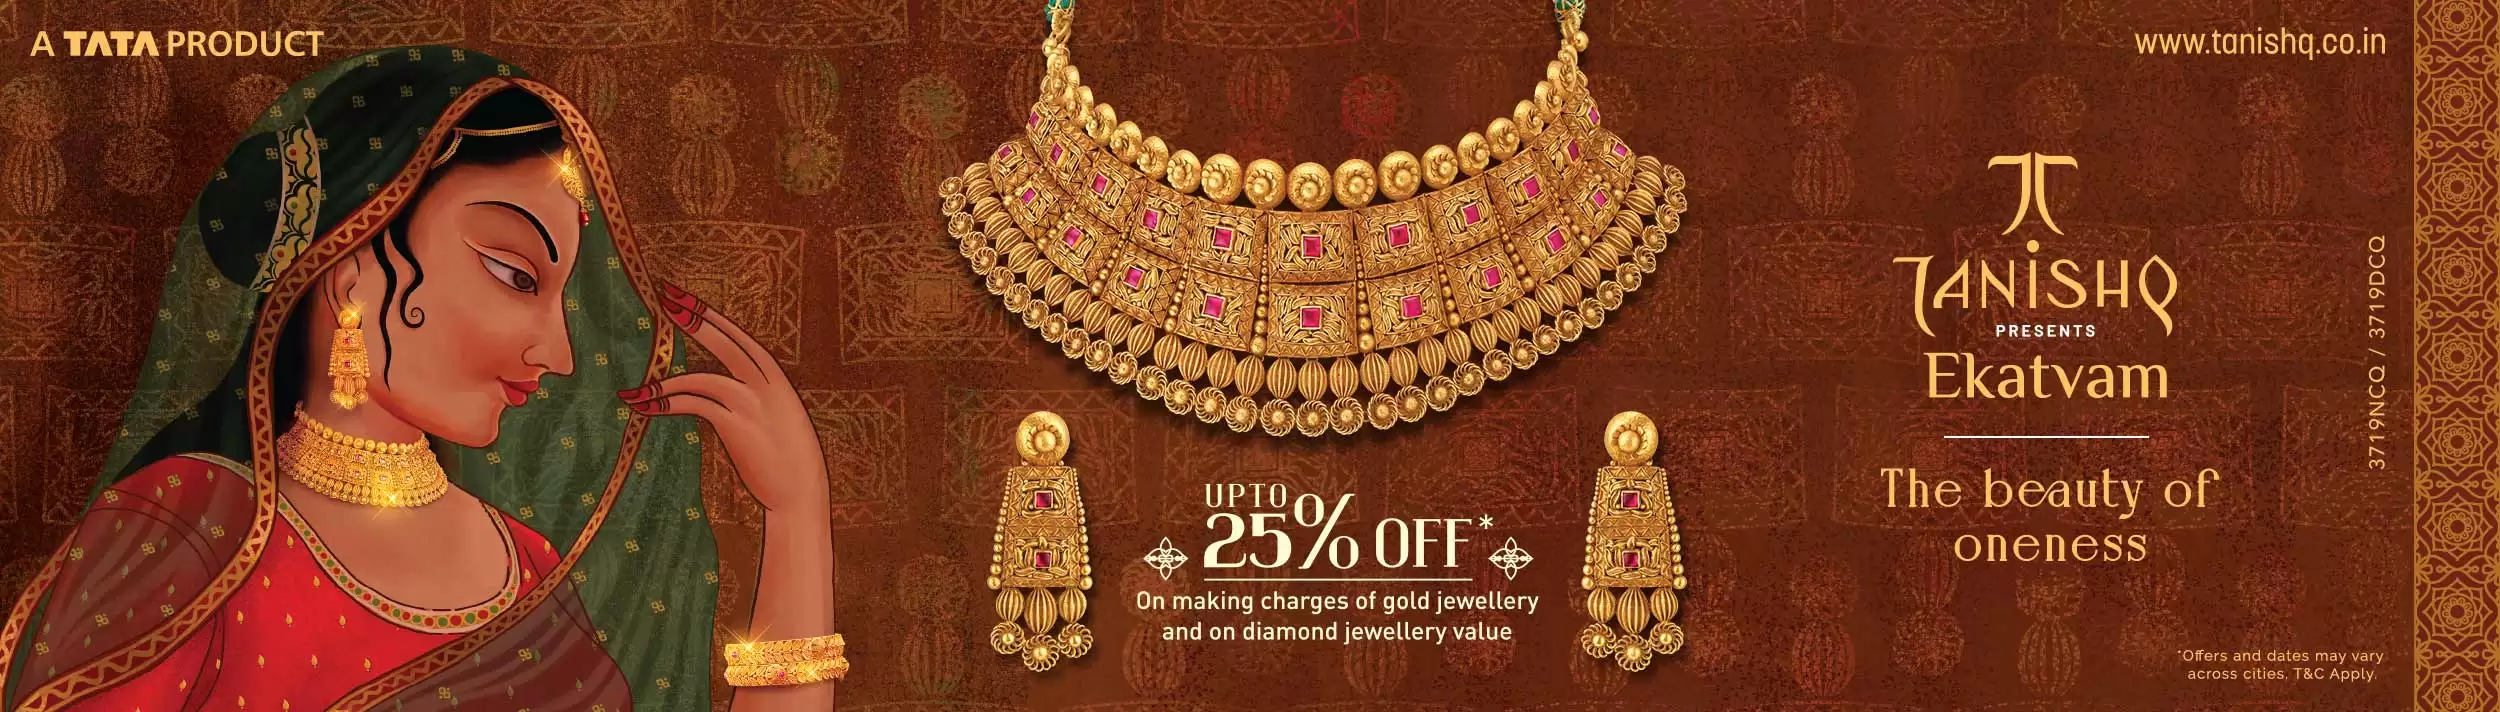 Get 25% Off On Making Charges At Tanishq This Festive Season